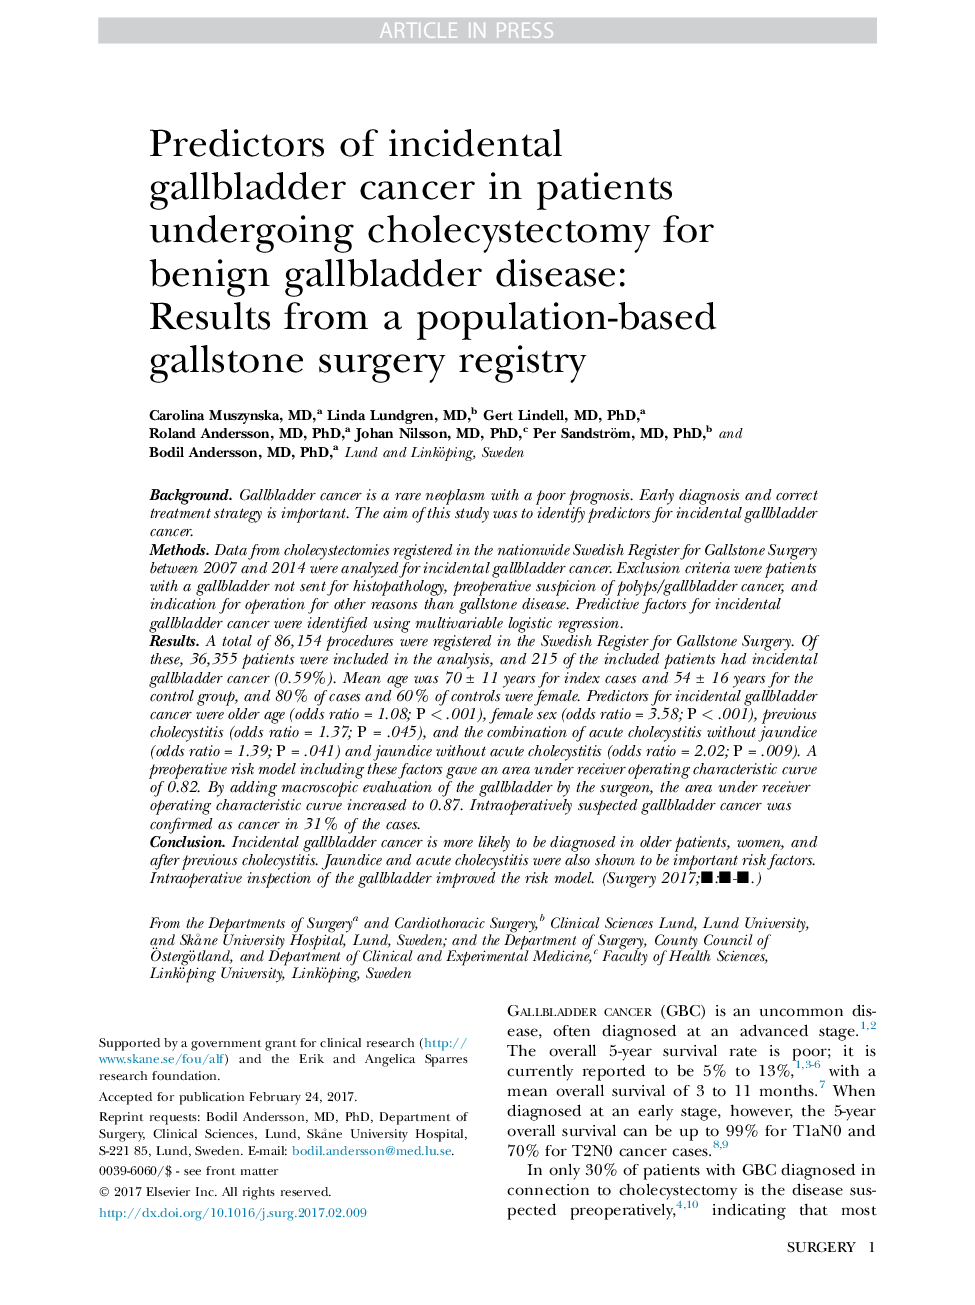 Predictors of incidental gallbladder cancer in patients undergoing cholecystectomy for benign gallbladder disease: Results from a population-based gallstone surgery registry